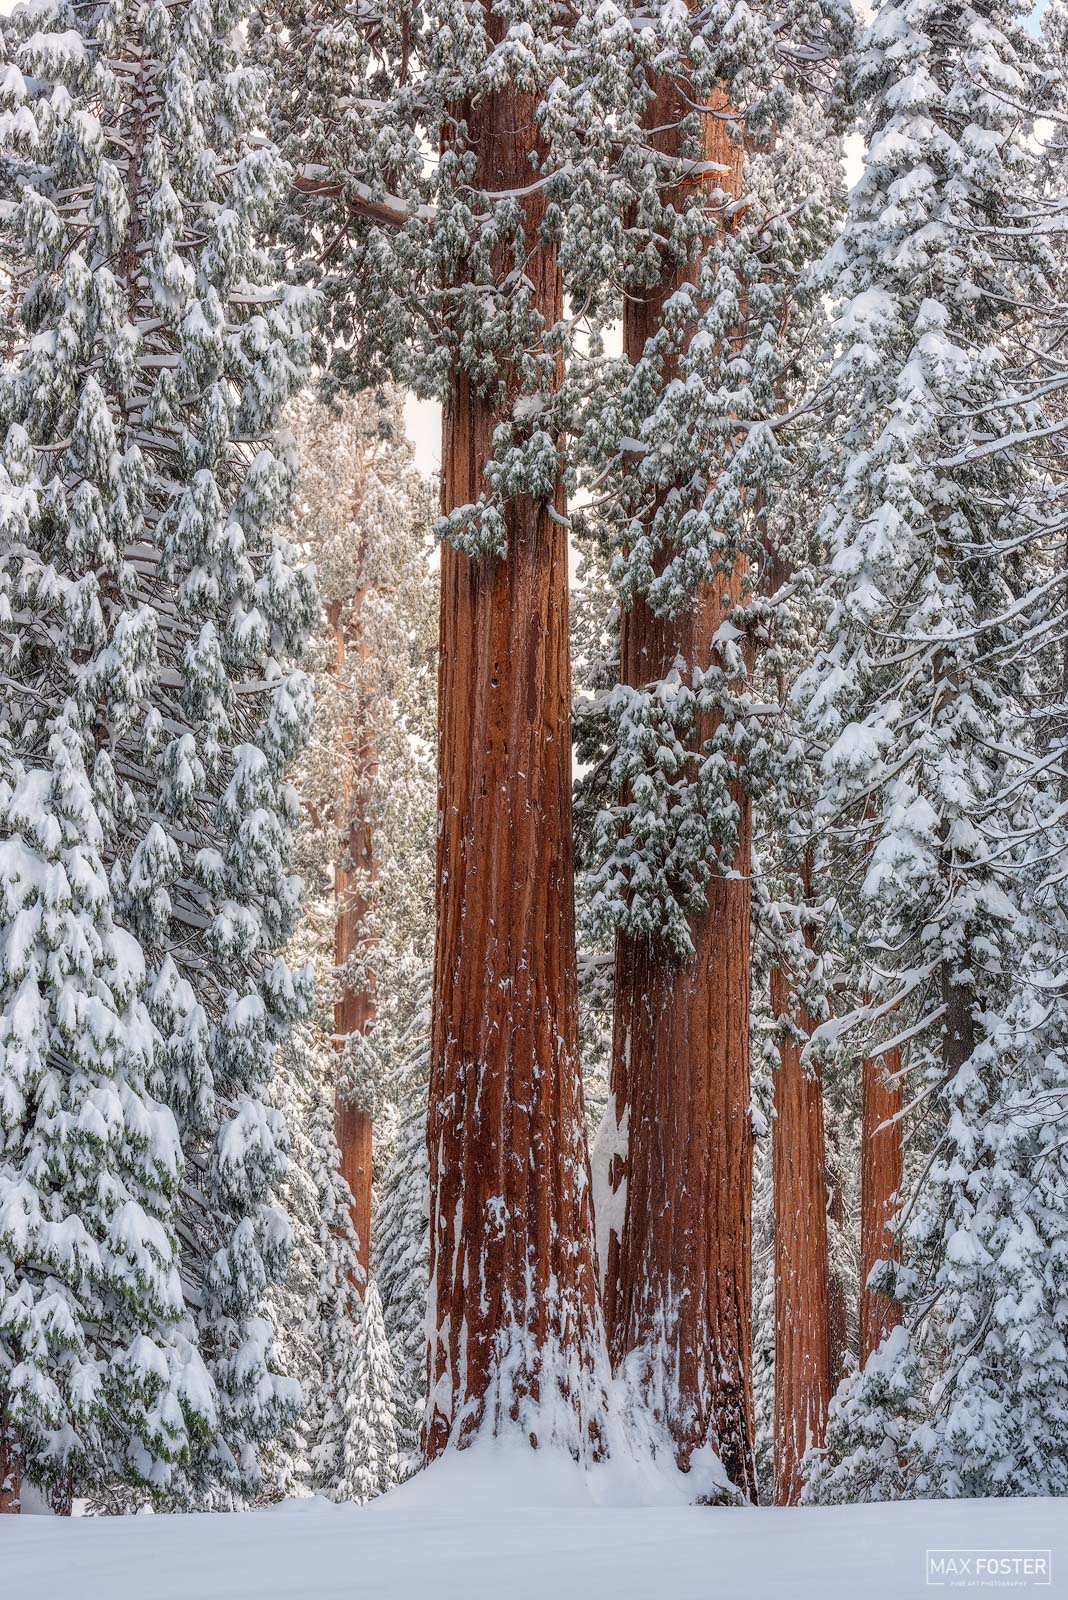 Elevate your space with Standing Still, Max Foster's limited edition photography print of Giant Sequoias in Kings Canyon National...